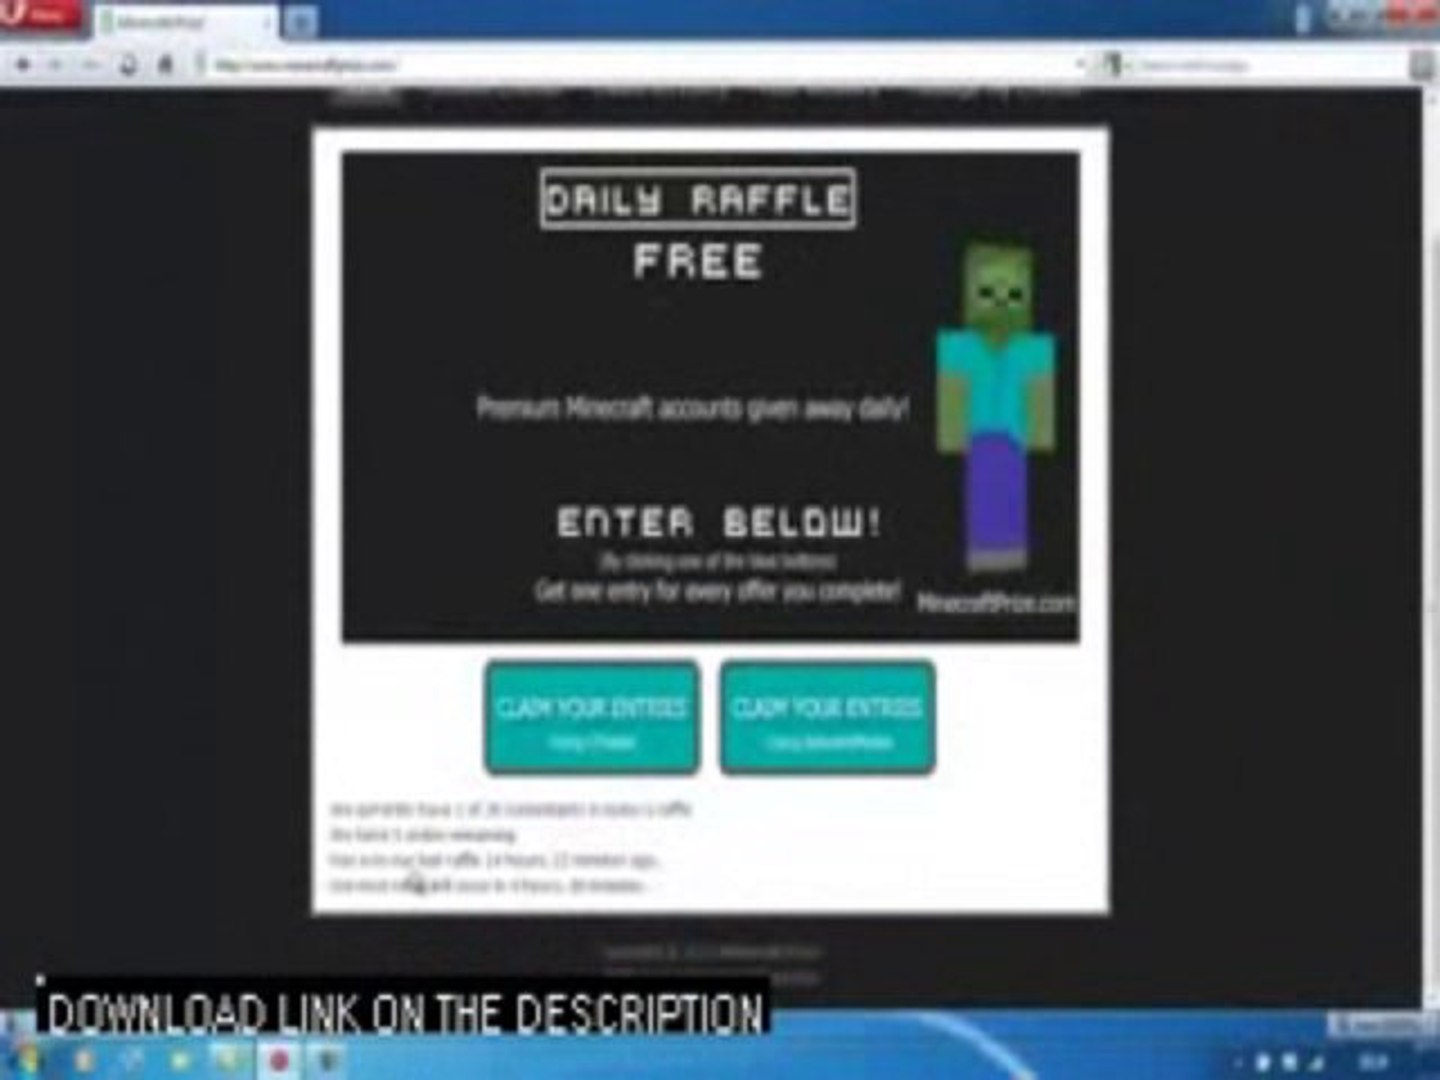 Free: Minecraft Premium Account Code; GIN 26095 - Video Game Prepaid Cards  & Codes -  Auctions for Free Stuff